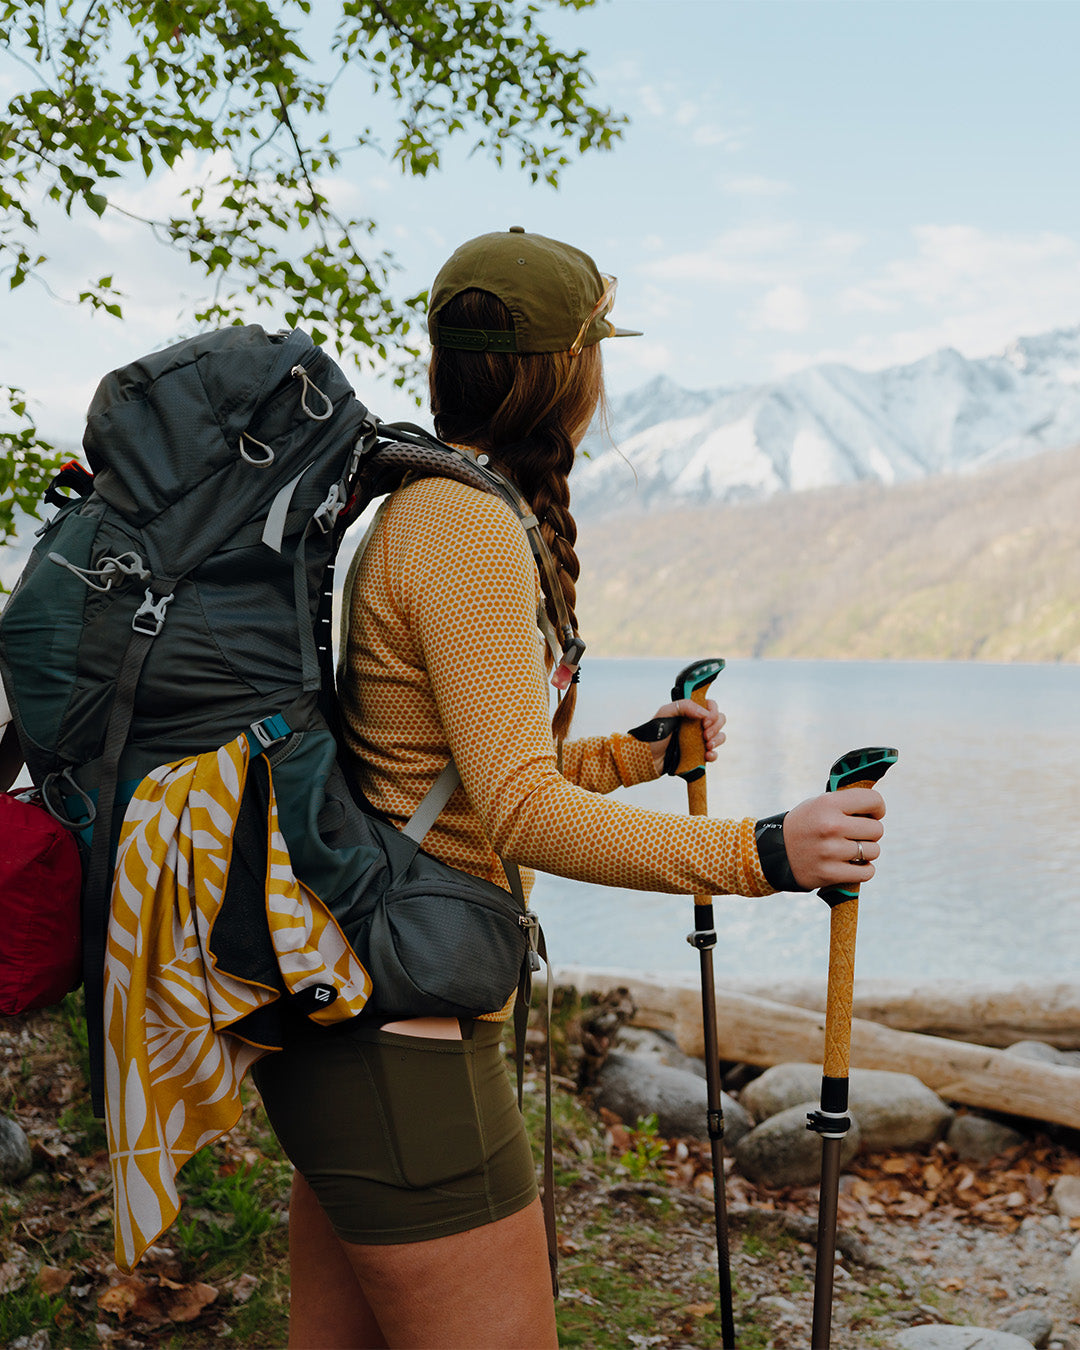 Adventure photographer, @evangelea, ready for a backpacking trip.